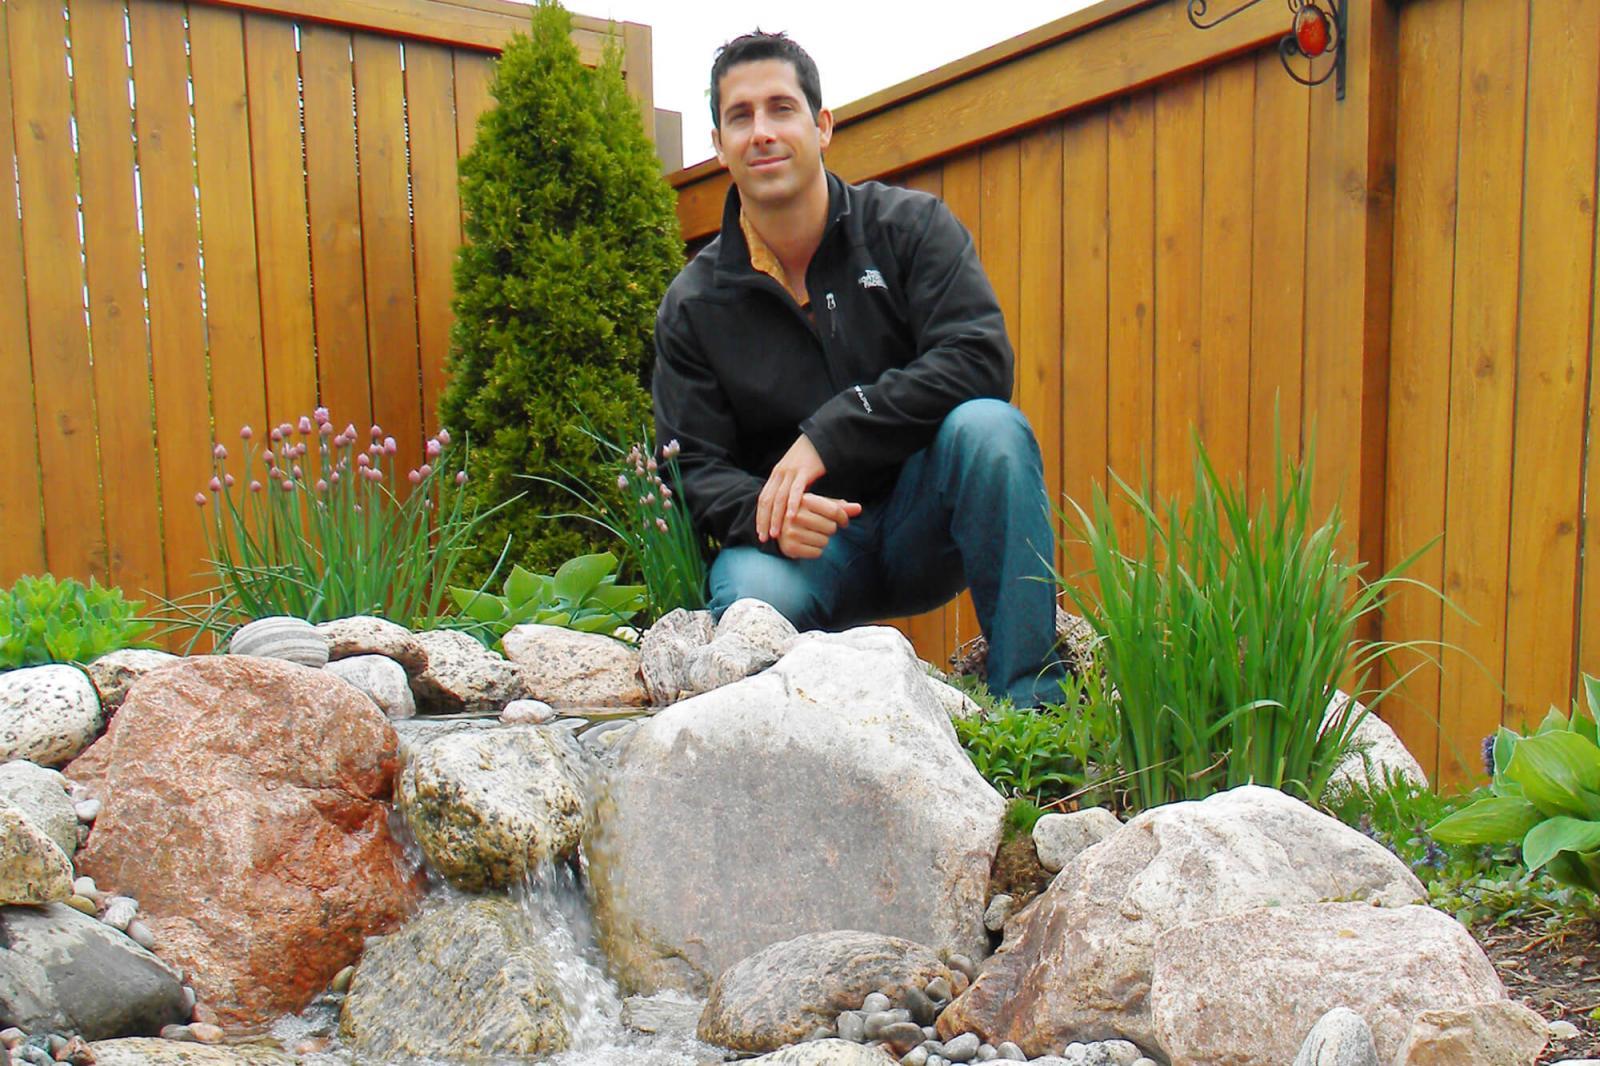 Chris Le Conte of Smart Watering Systems demonstrates harvesting rainwater within attractive landscape.